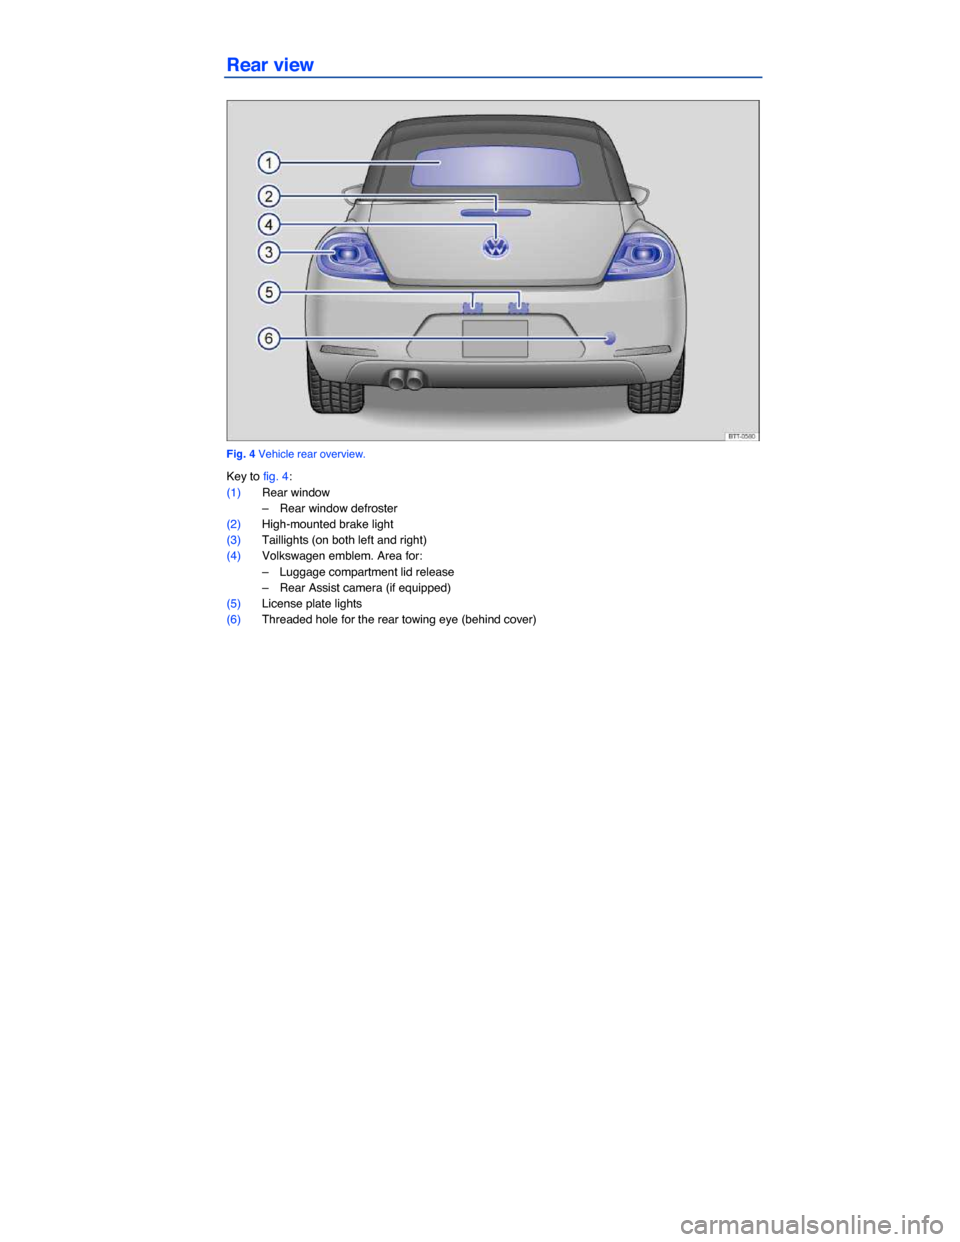 VOLKSWAGEN BEETLE CONVERTIBLE 2014 3.G Owners Manual  
Rear view 
 
Fig. 4 Vehicle rear overview. 
Key to fig. 4: 
(1) Rear window 
–  Rear window defroster  
(2) High-mounted brake light  
(3) Taillights (on both left and right)  
(4) Volkswagen embl